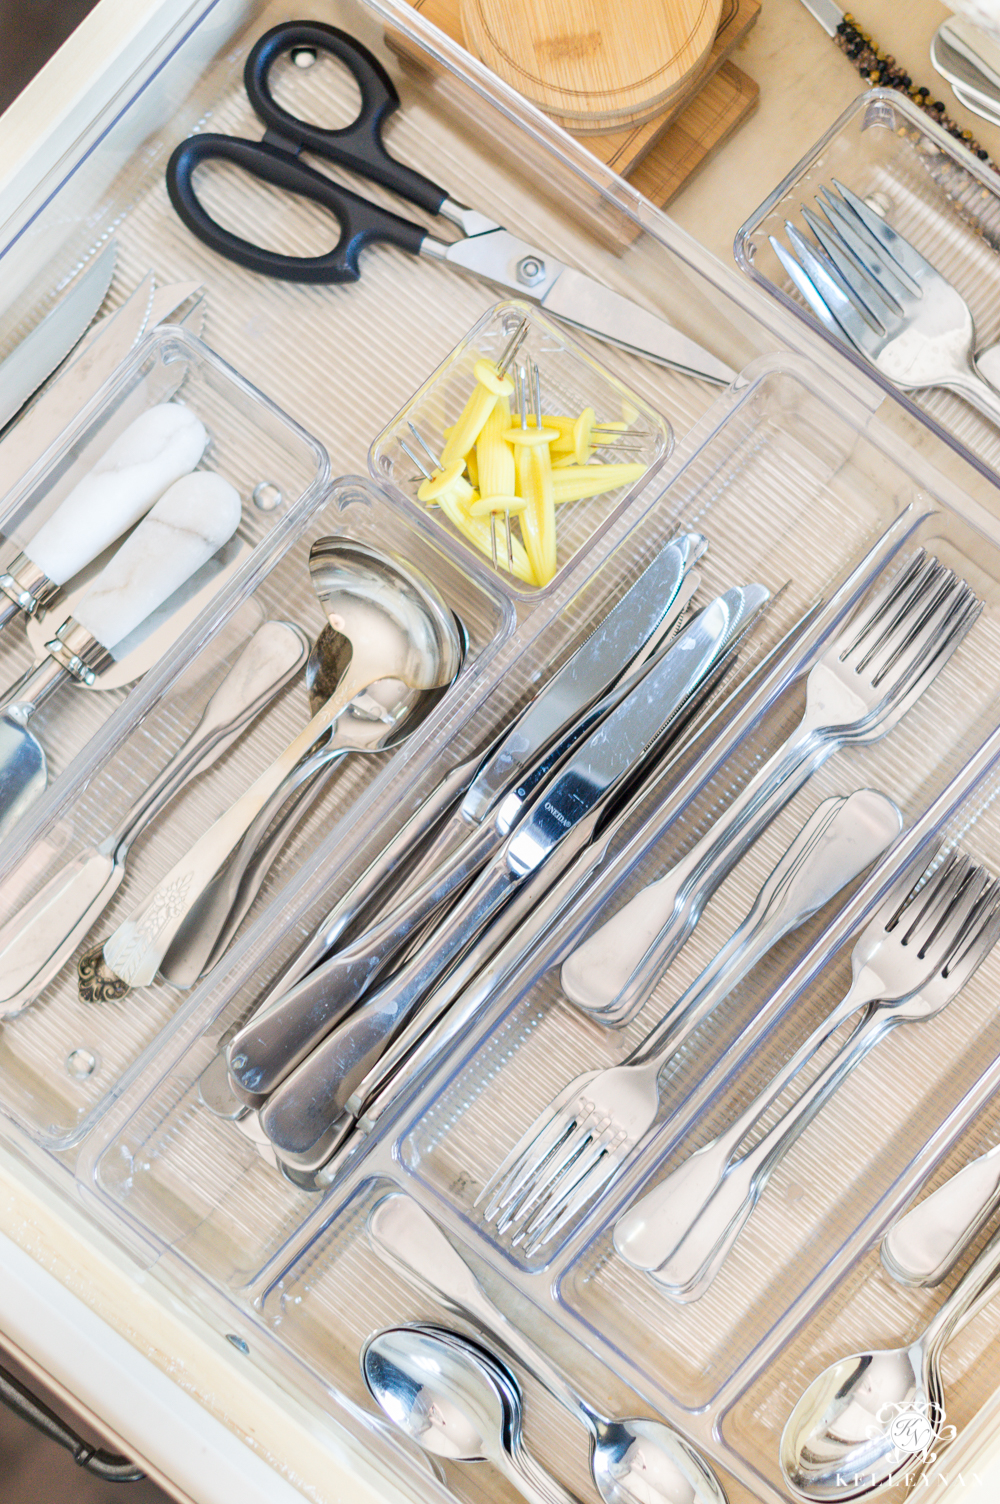 Organized flatware and best clear drawer organizers